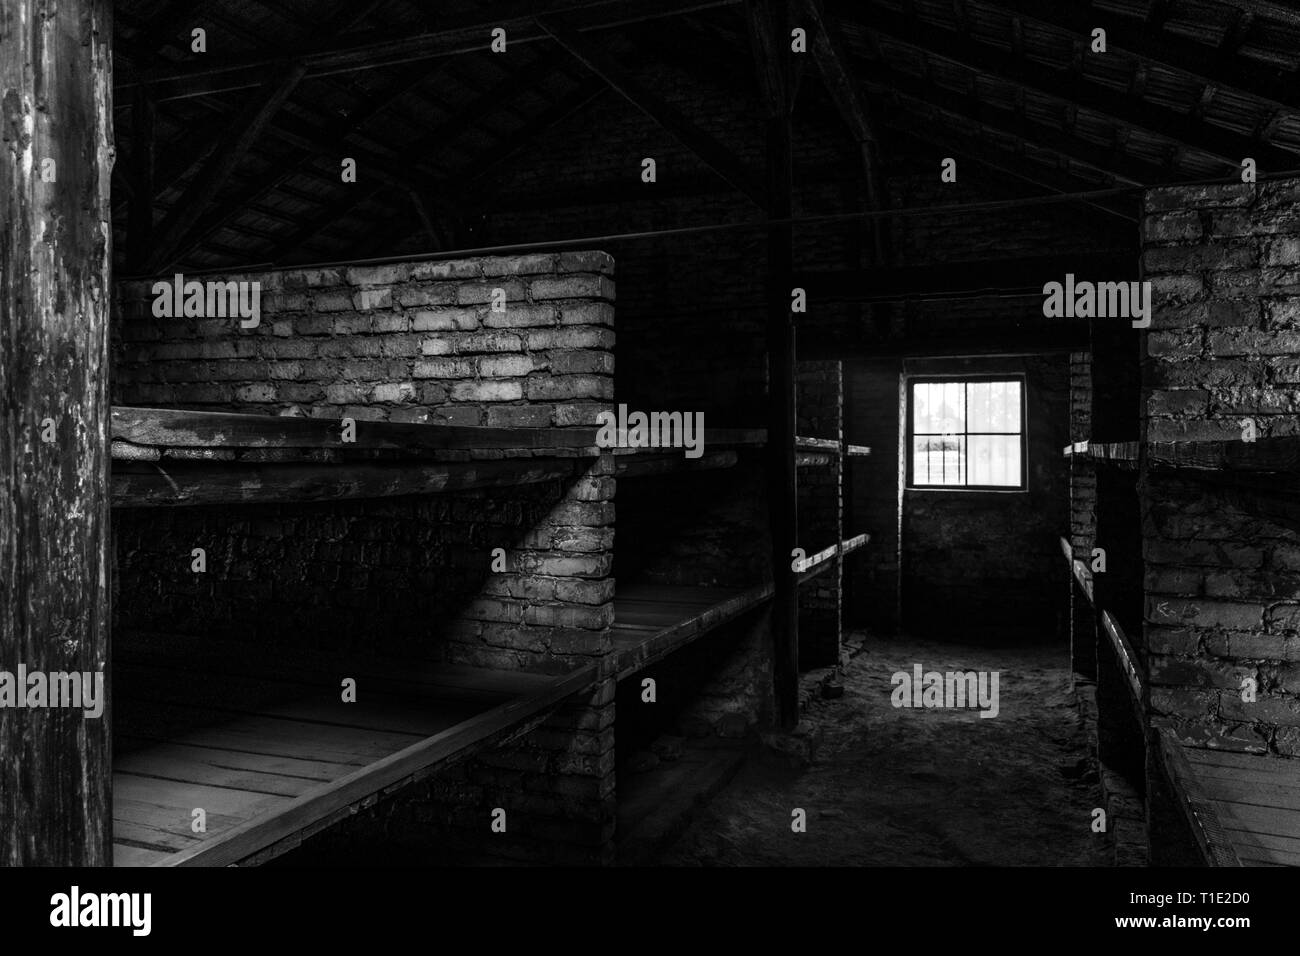 BW photo of sleeping quarters with wooden bunk beds showing prisoners terrible living conditions at The Nazi concentration camp of birkenau in Stock Photo